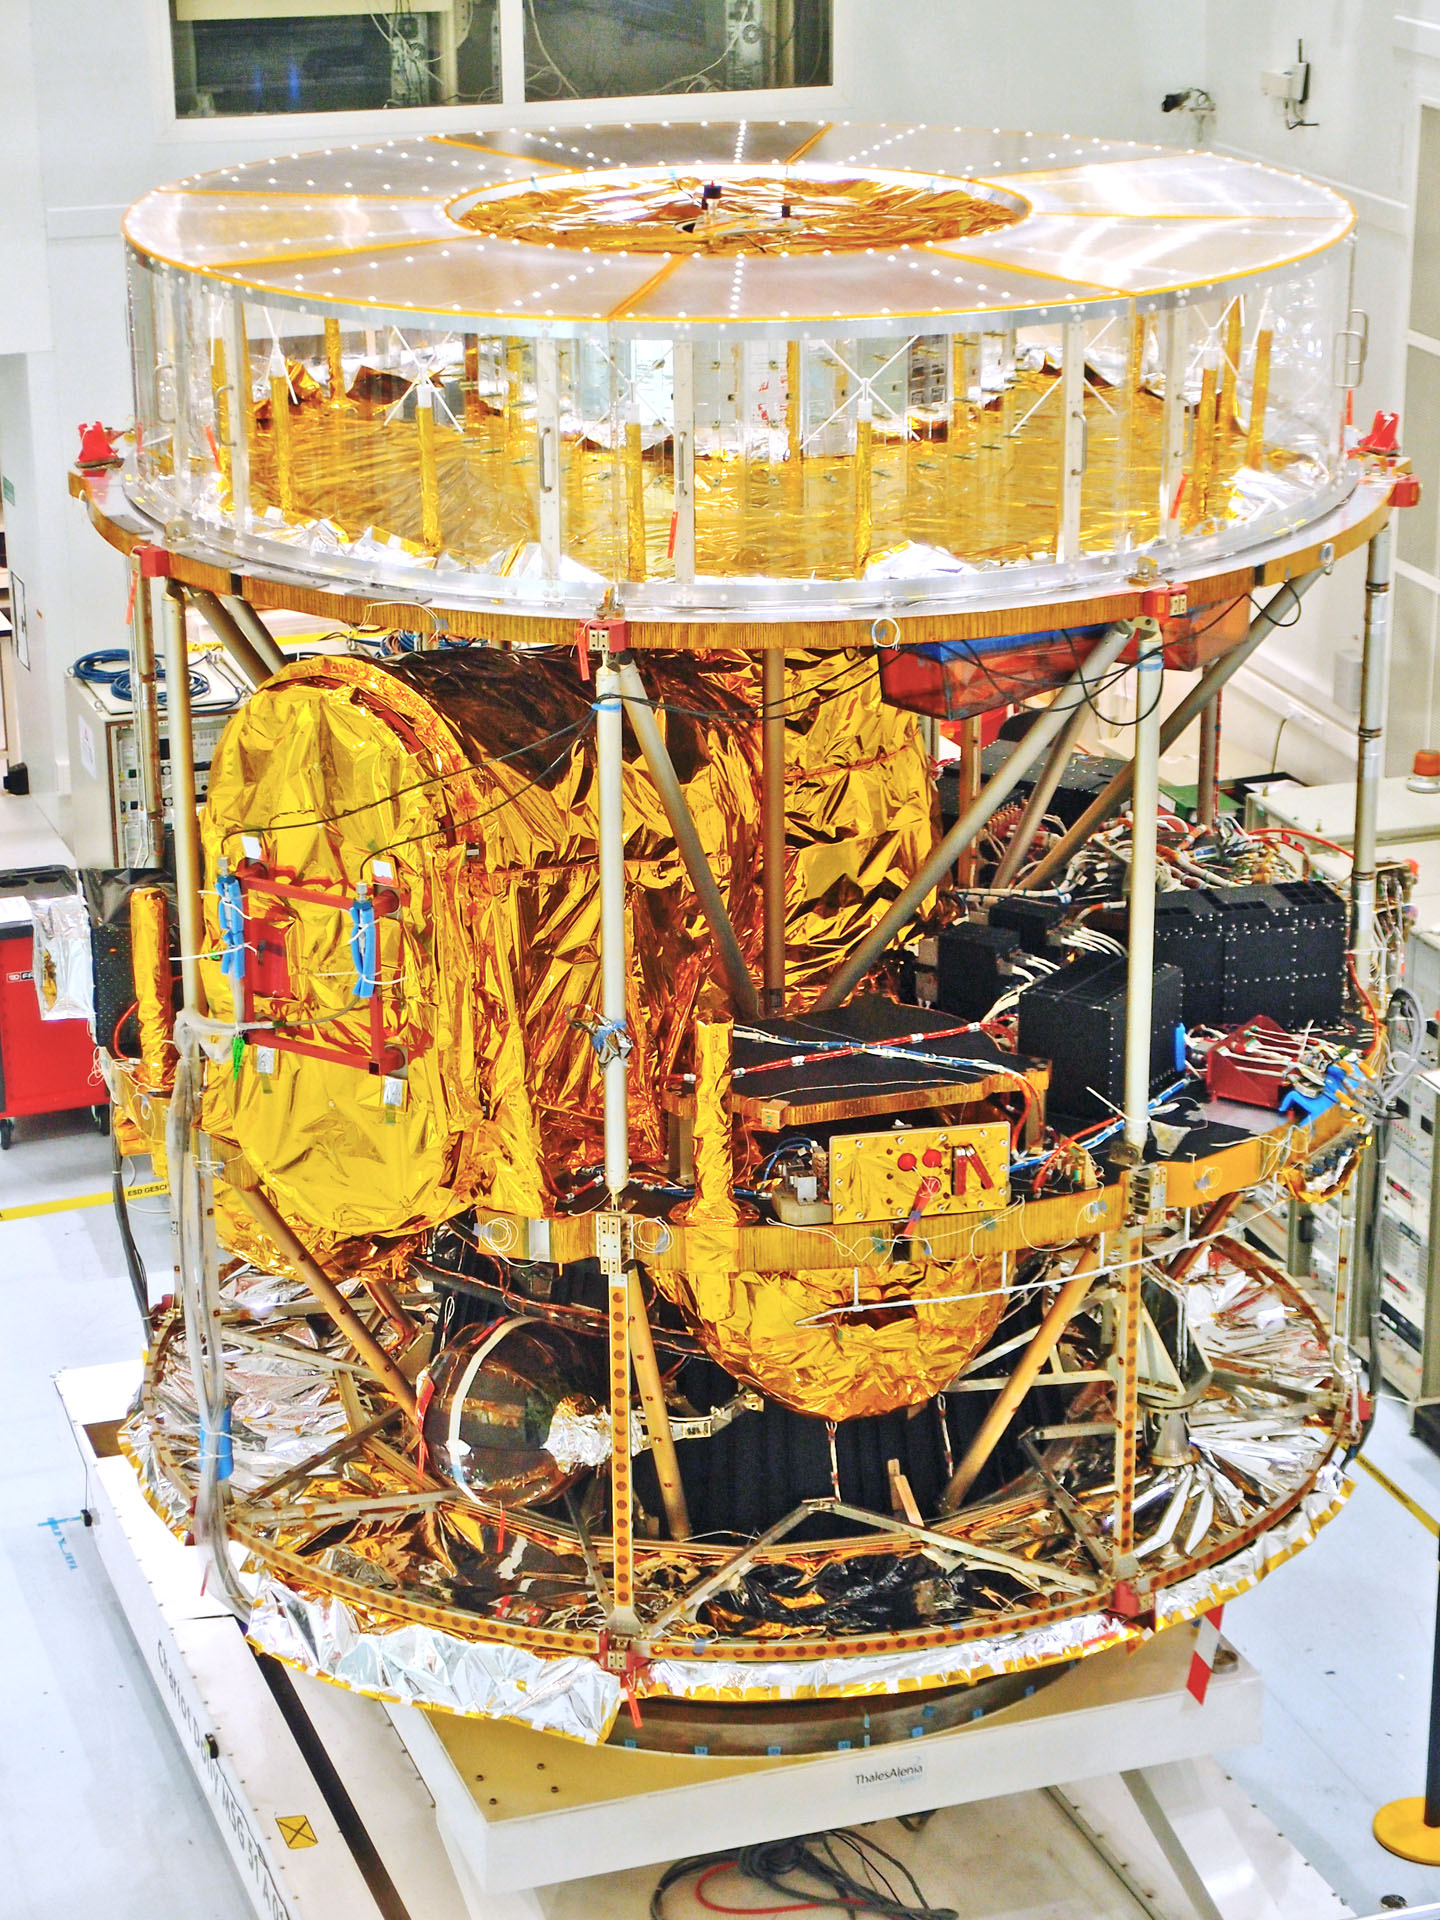 Msg 3 Satellite Ready To Continue Weather Monitoring Service